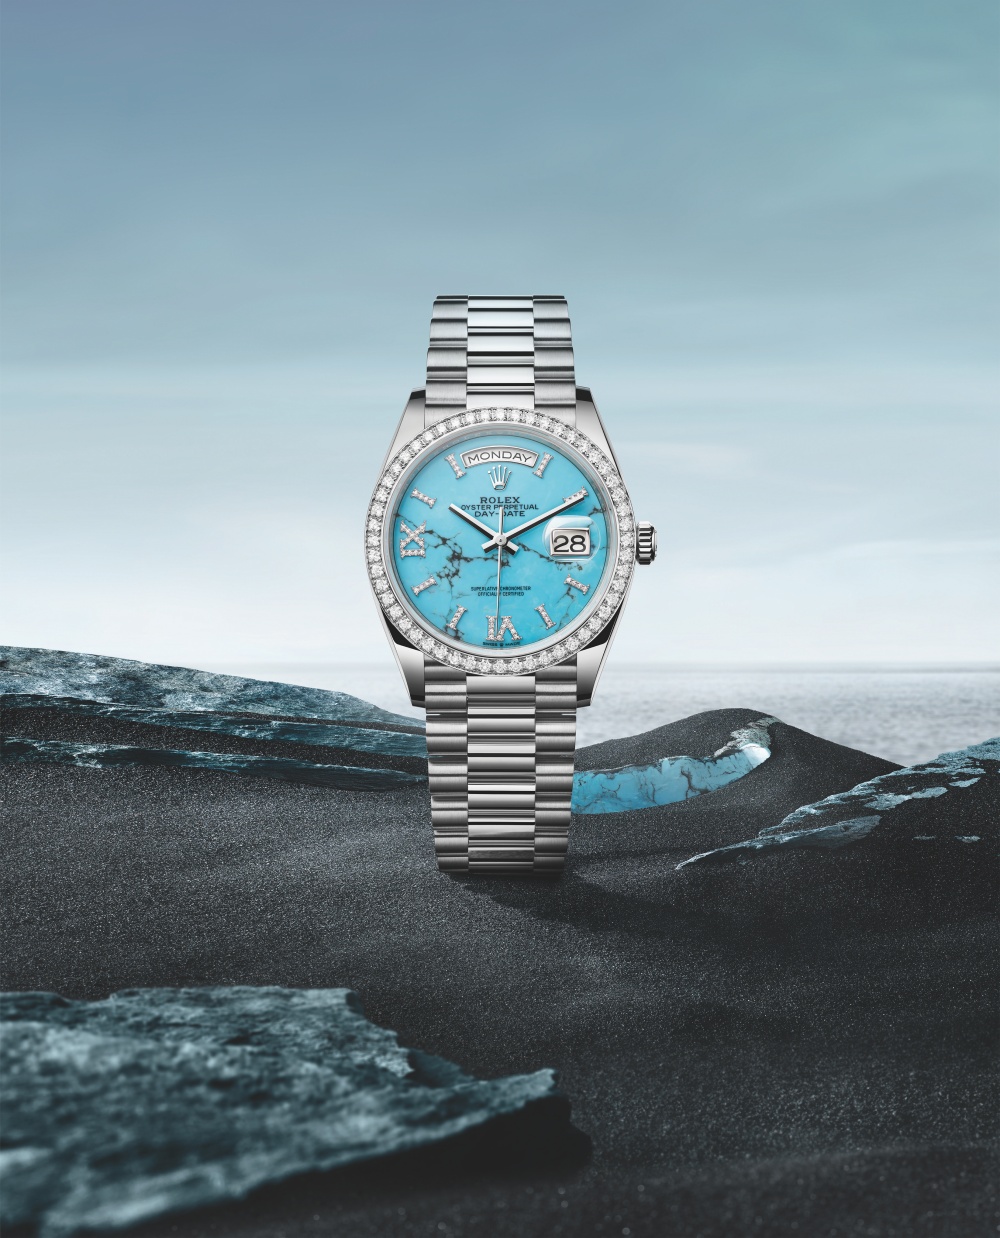 Đồng hồ Oyster Perpetual Day-Date 36, mặt số đá turquoise 